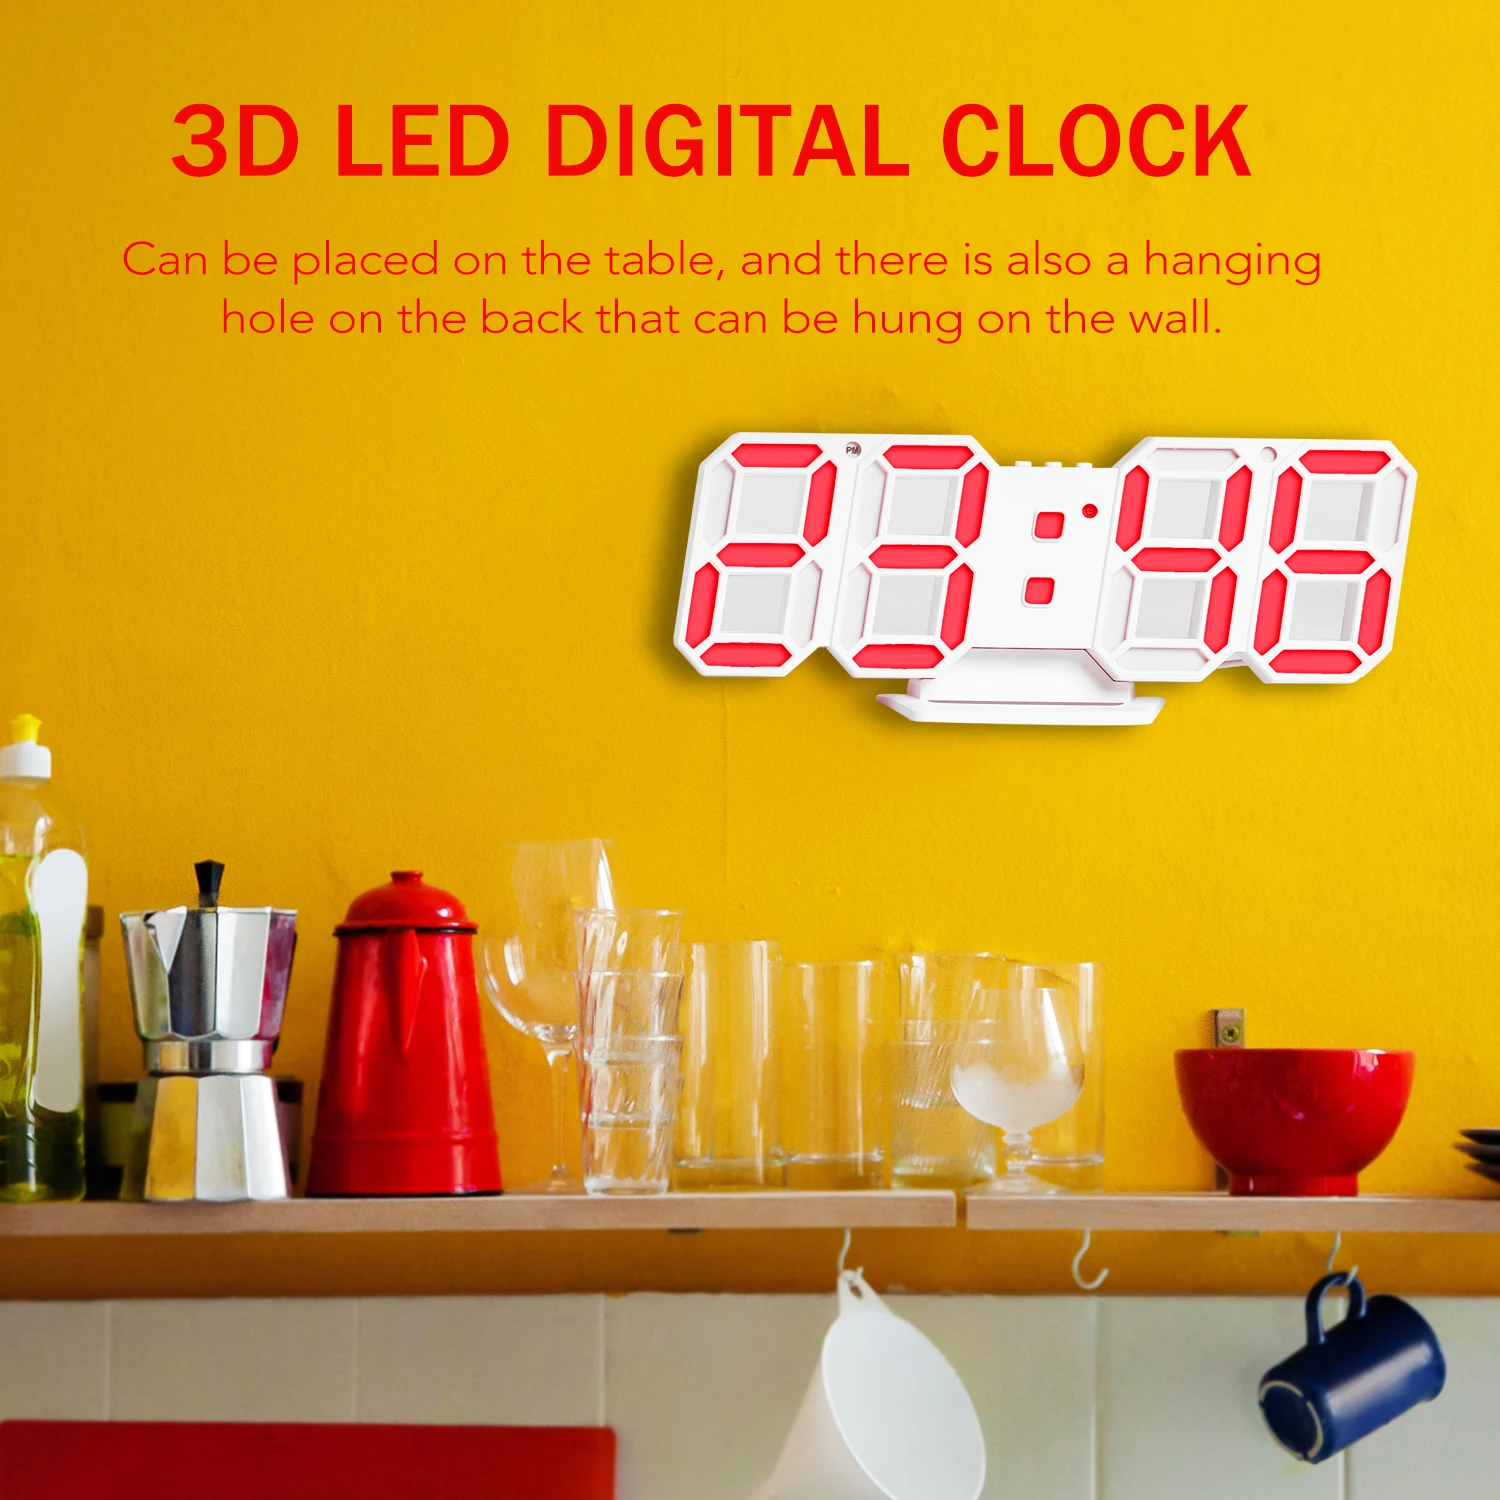 Фото LED Digital Clock 3D Electronic Table Alarm Wall Glowing Hanging Clocks Temperature Display Home Decoration | Дом и сад